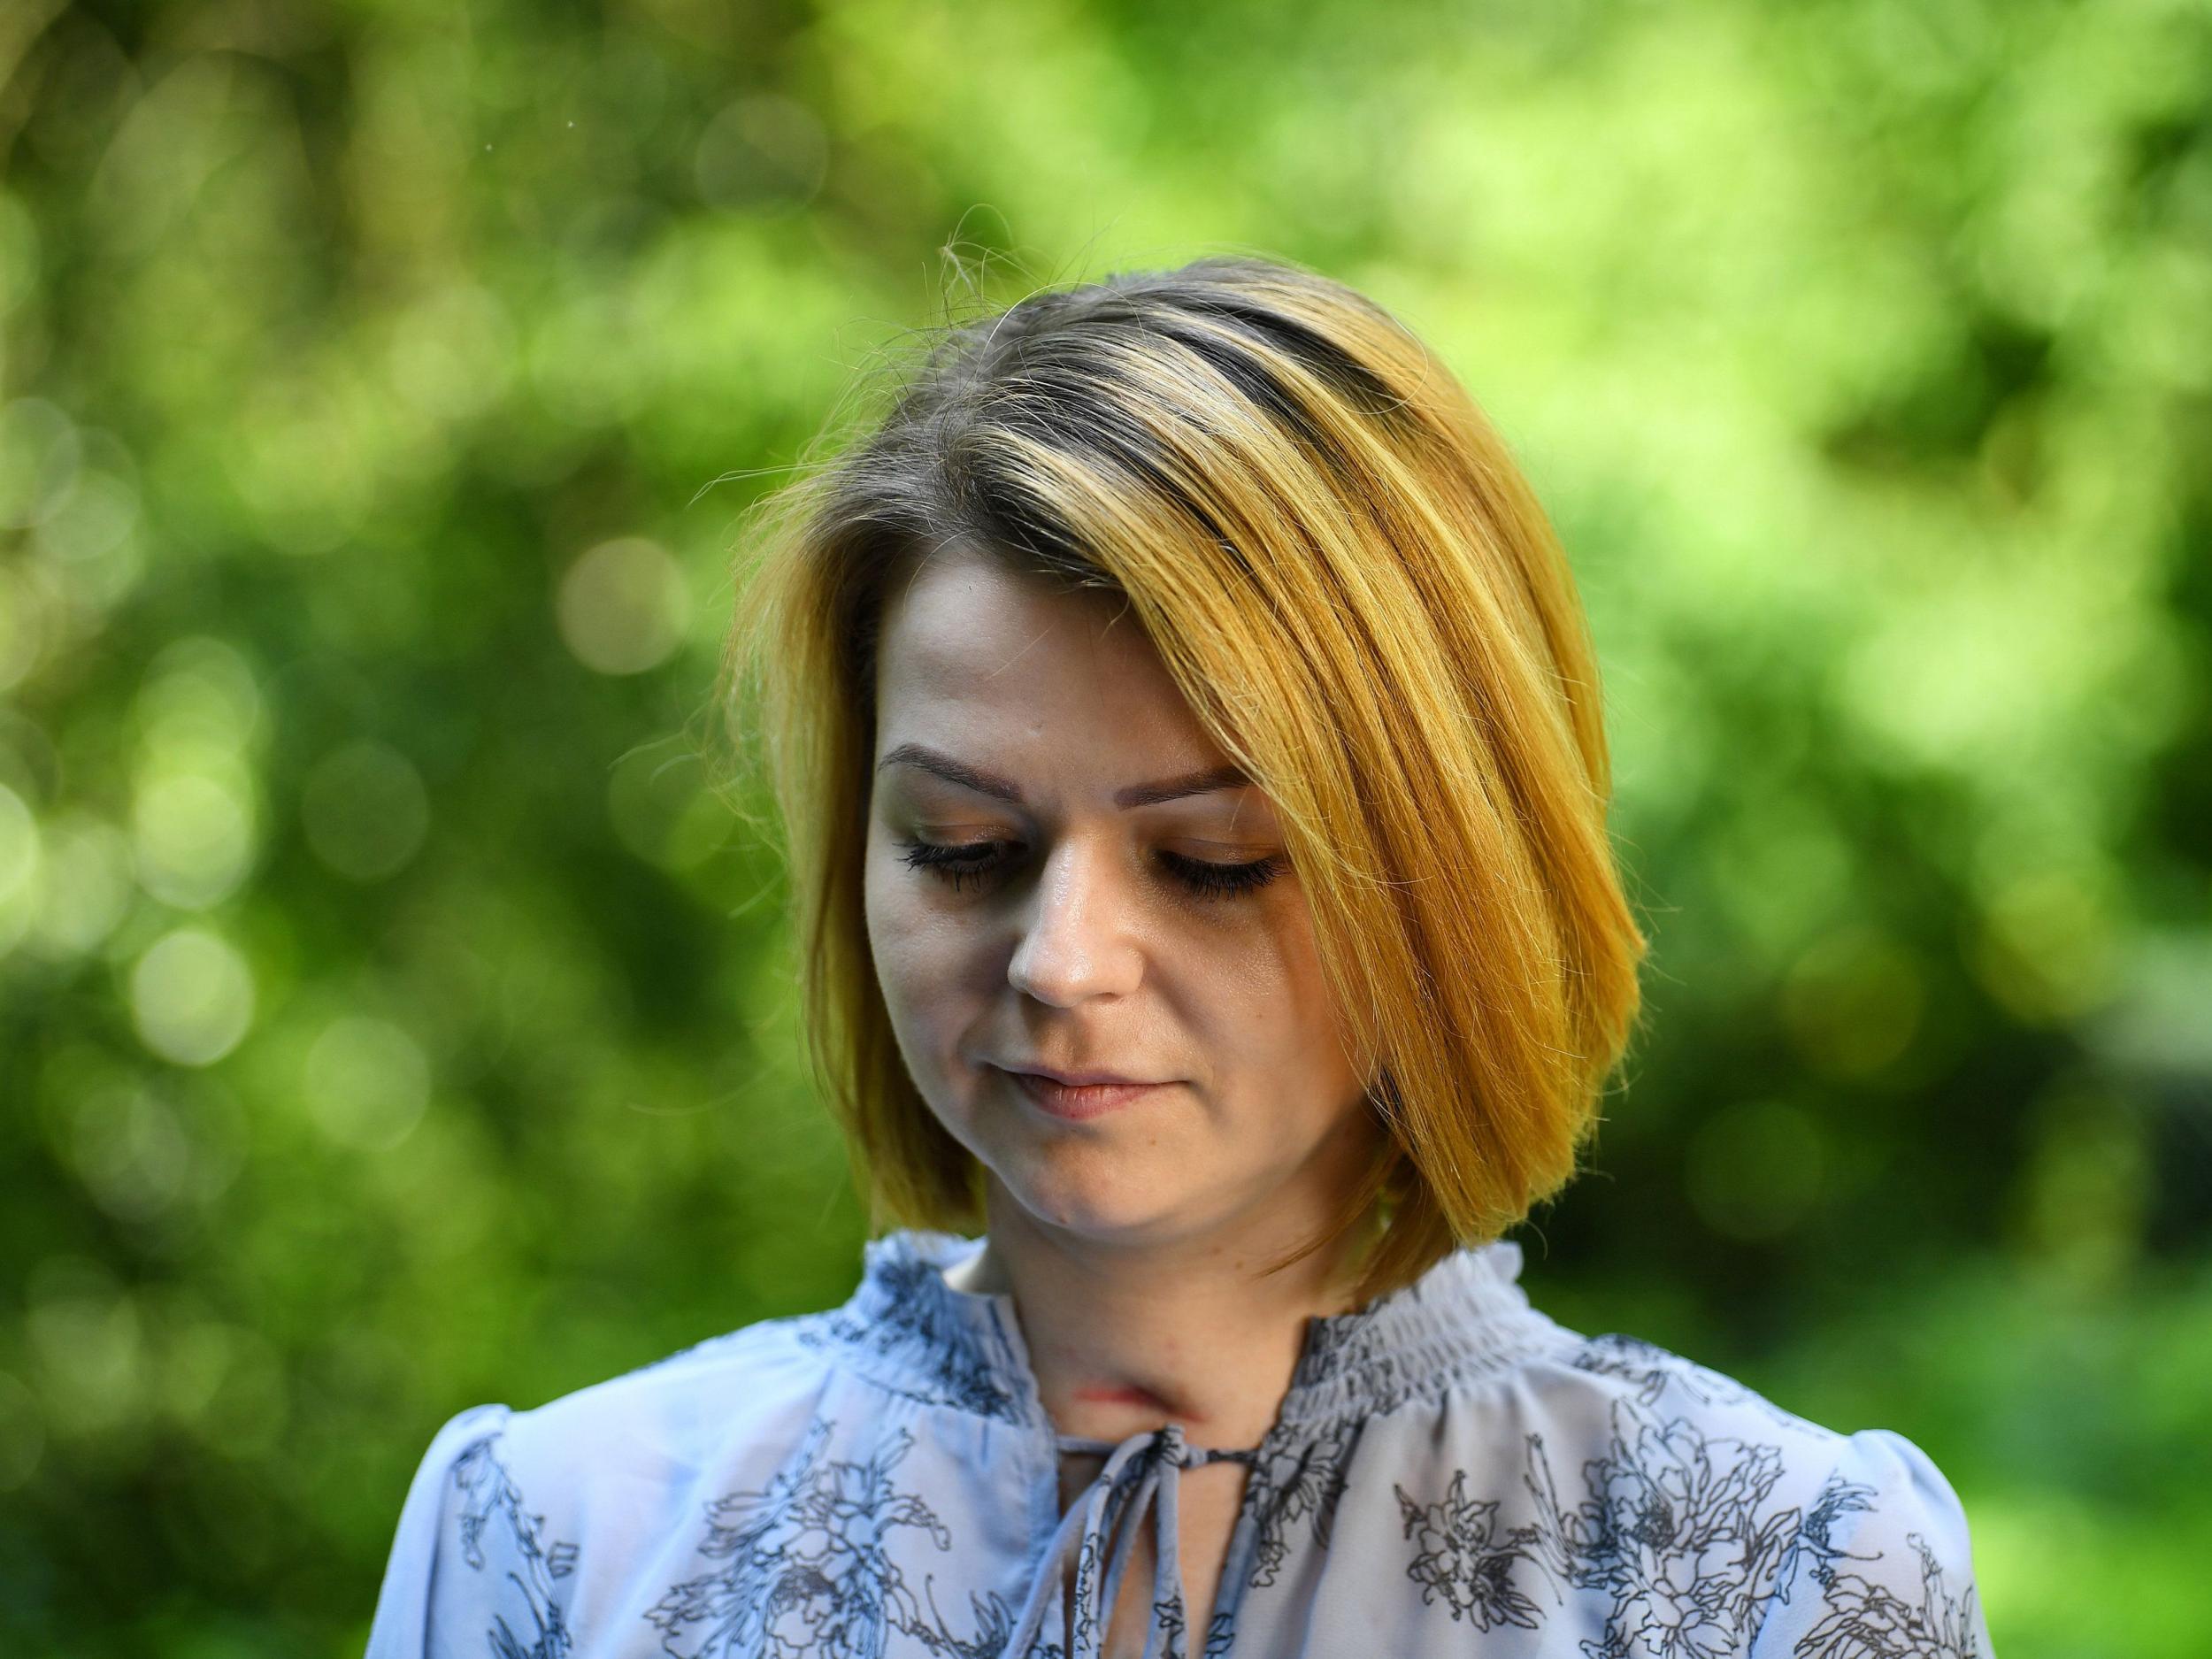 Yulia Skripal was poisoned along with her father in an assassination attempt in Salisbury, England